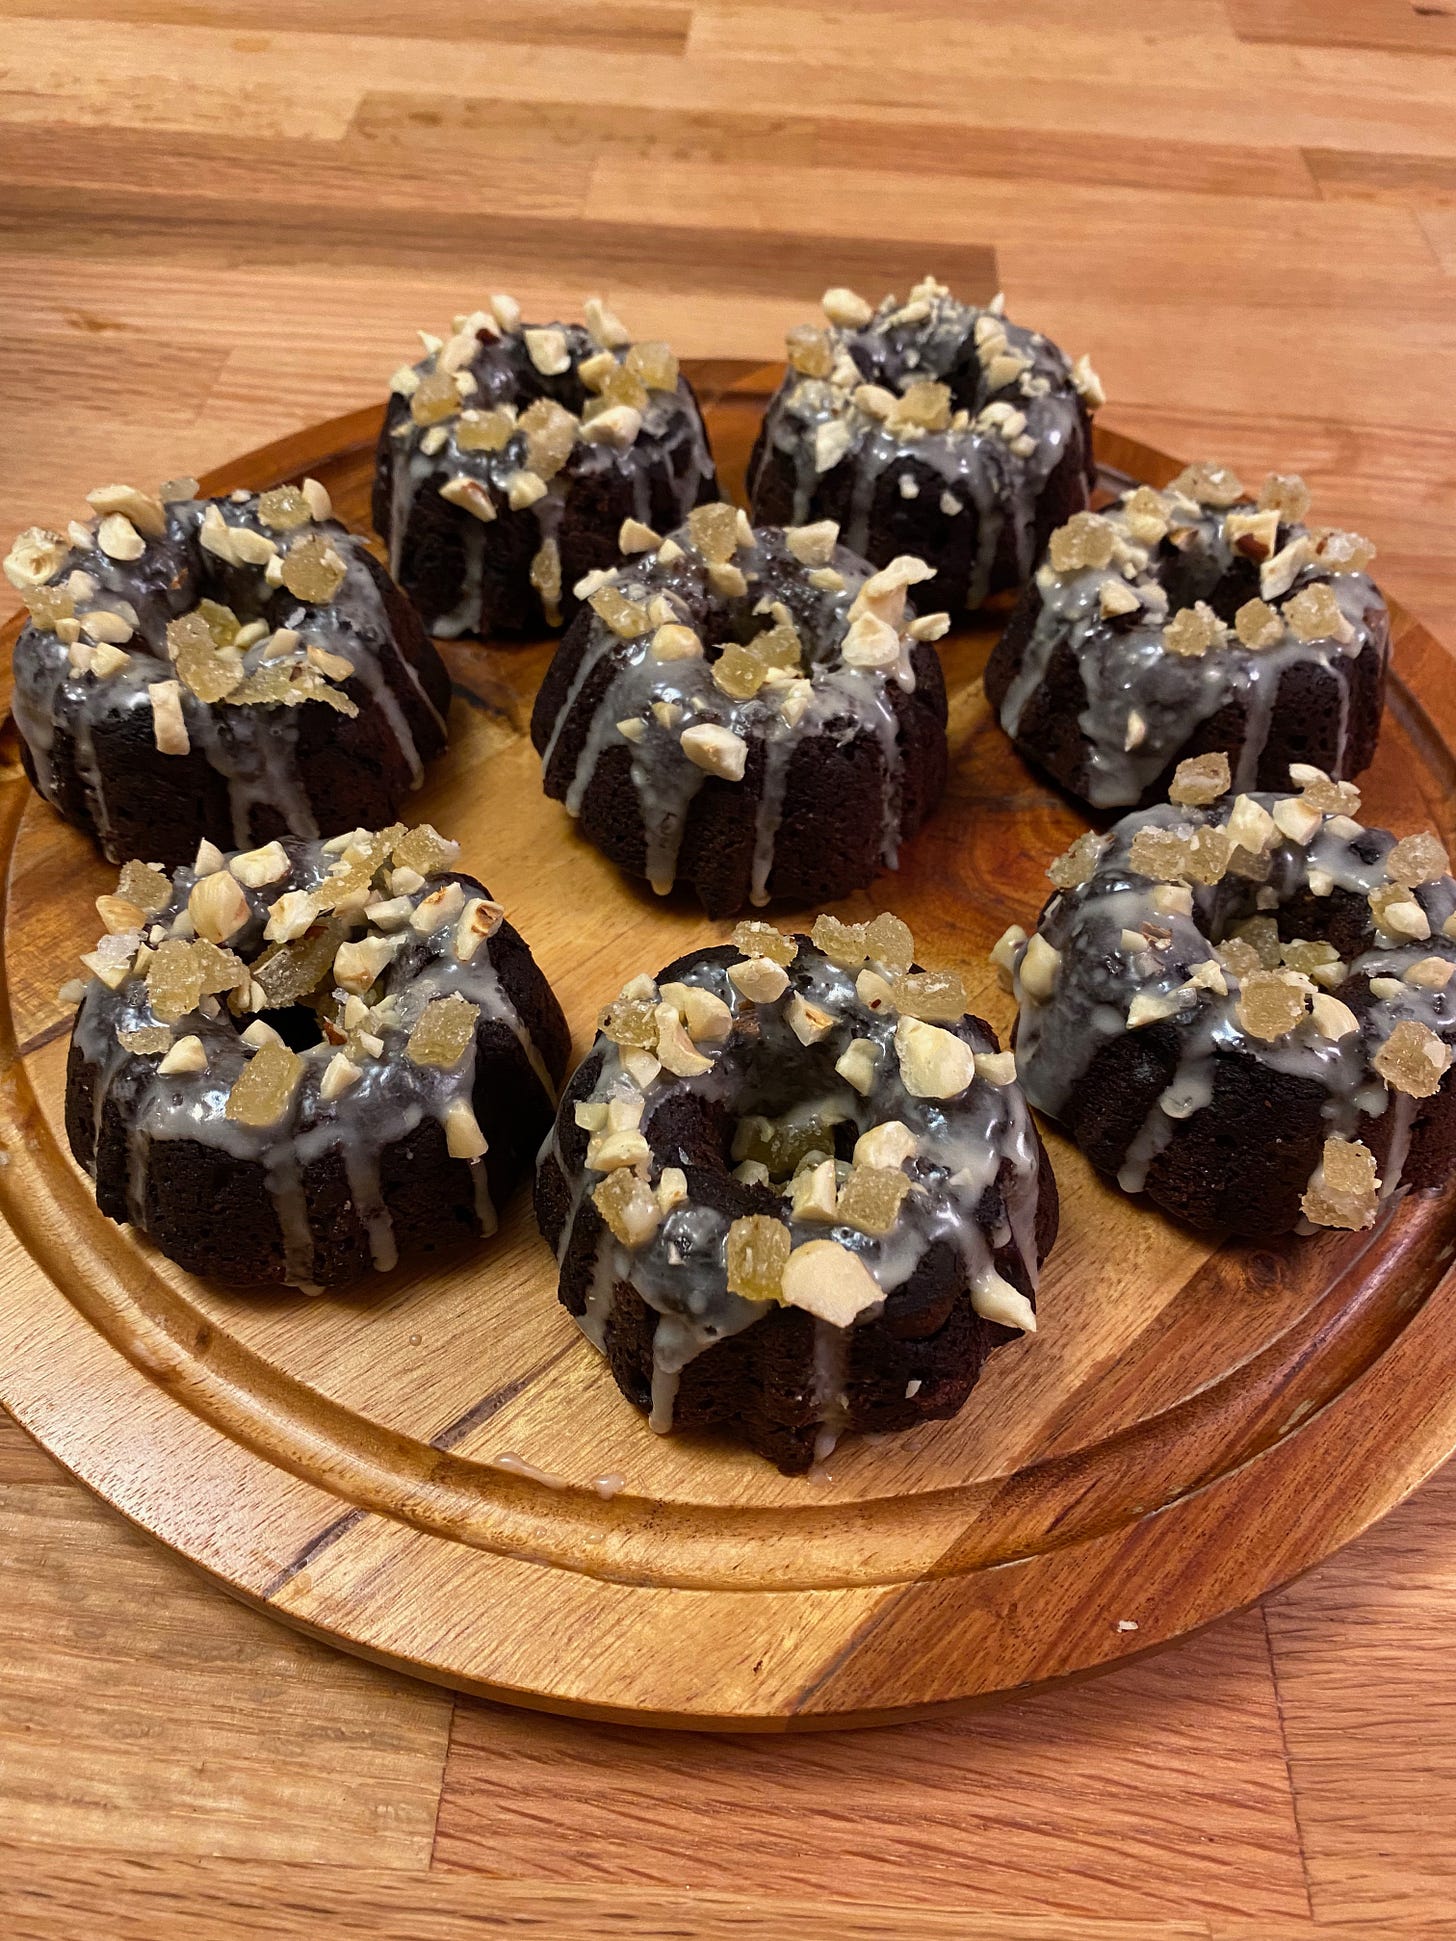 Eight mini chocolate bundt cakes are arranged in a circle on a wooden platter. They all have vanilla glaze running down their sides, and they are topped with chopped candied ginger and hazelnuts.